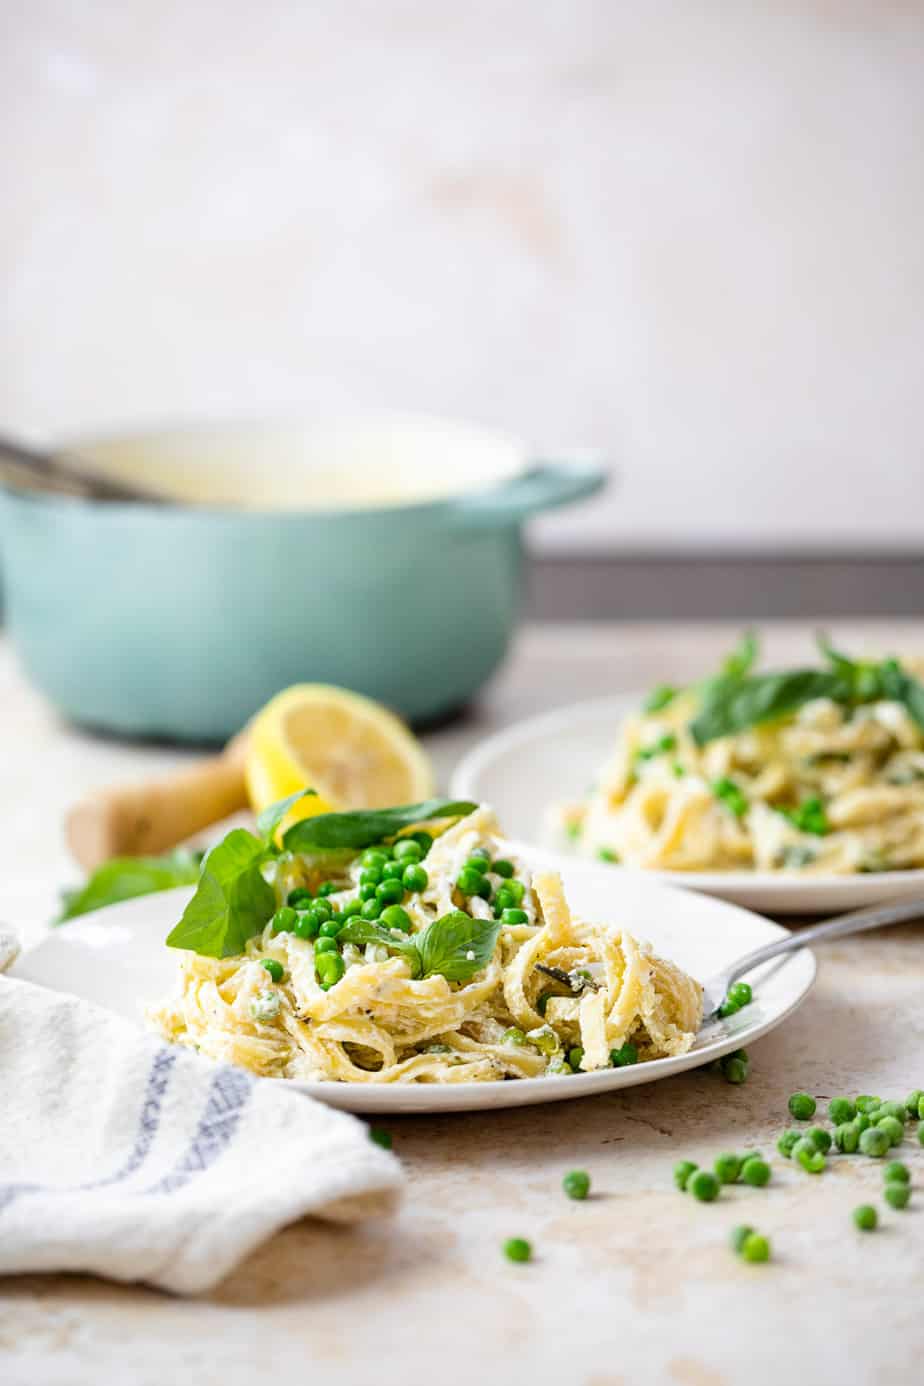 Lemon and Ricotta Cheese Pasta in a bowl garnished with fresh basil and peas.